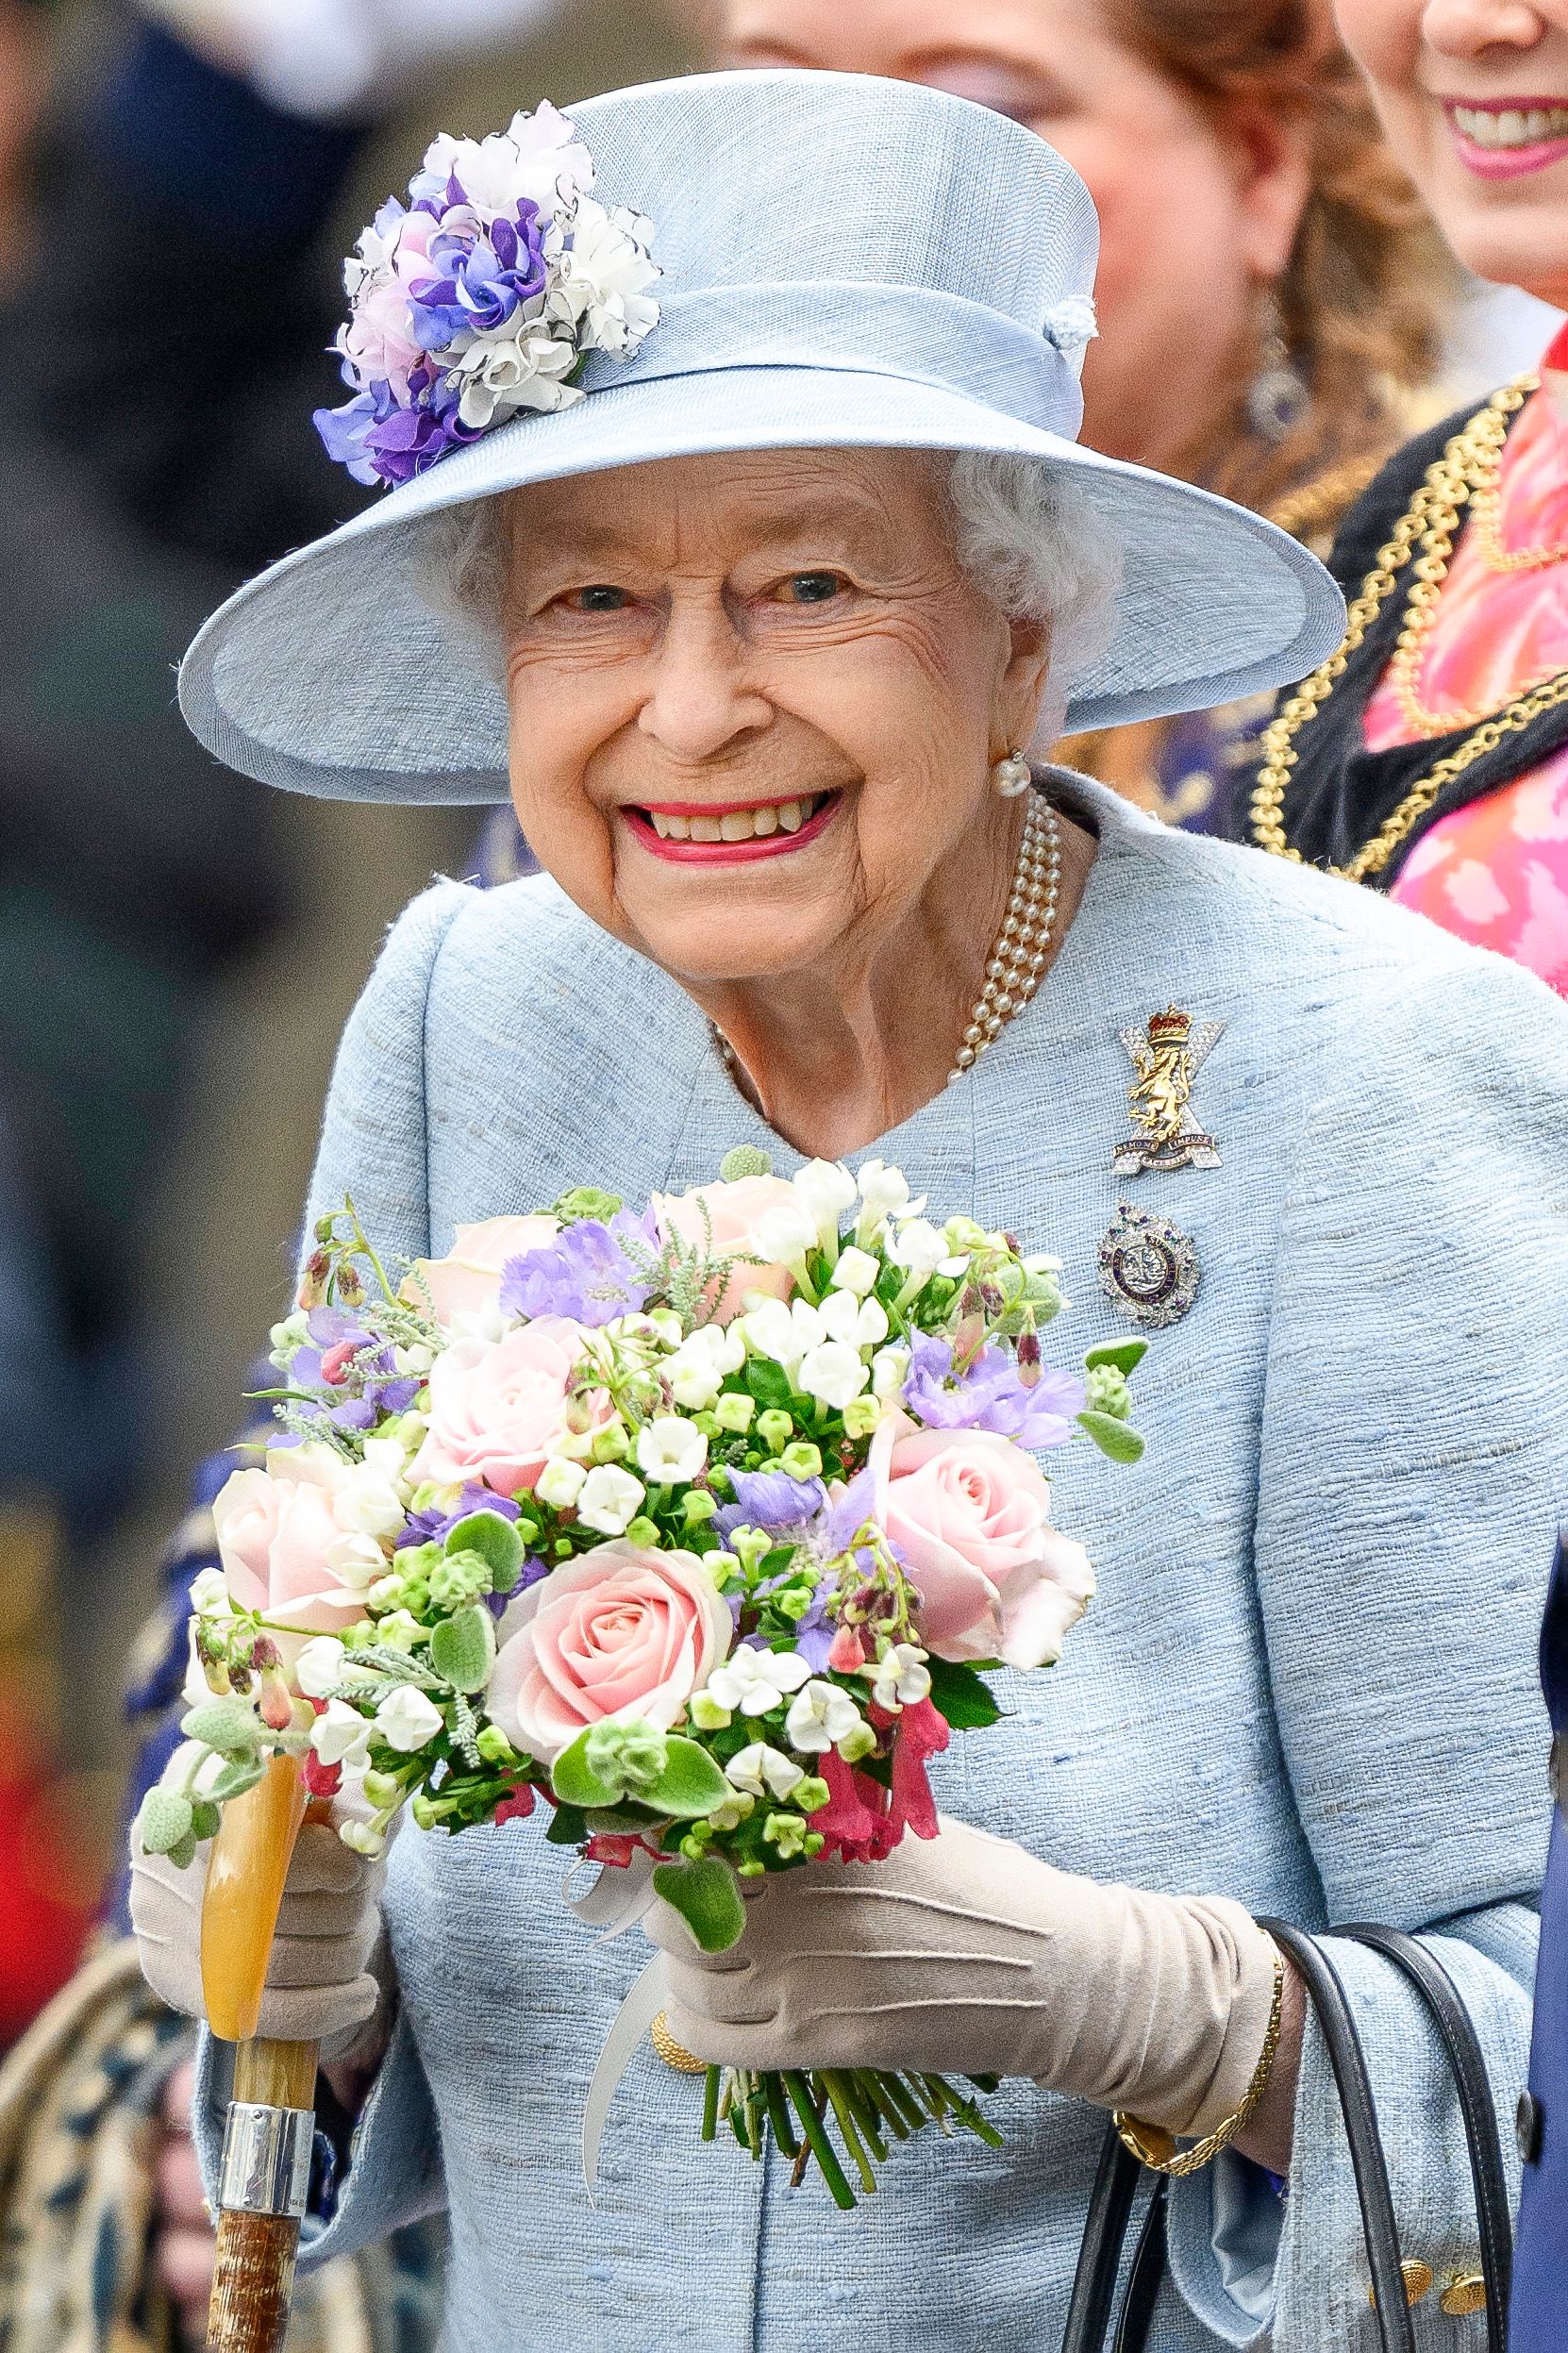 <p>Queen Elizabeth II beamed during the Ceremony of the Keys at the Palace of Holyroodhouse during Holyrood Week in Edinburgh, Scotland, on June 27, 2022 -- just two months before her death. It was her first public appearance, following bouts of poor health sparked by ongoing mobility issues, since her <a href="https://www.wonderwall.com/celebrity/royals/platinum-jubilee-see-the-best-photos-from-4-days-of-celebrations-marking-the-queens-70-year-reign-606239.gallery">Platinum Jubilee celebrations</a> ended on June 5. Traditionally, the monarch would head to Scotland every year for her summer holidays. The country within the United Kingdom was a very special place for Her Majesty: The monarch was descended from Scotland's Royal House of Stewart on both sides of her family and had summered there since she was a child, nestling in at Balmoral on her privately owned estate in the Scottish Highlands that's belonged to her family since the 1840s.</p>